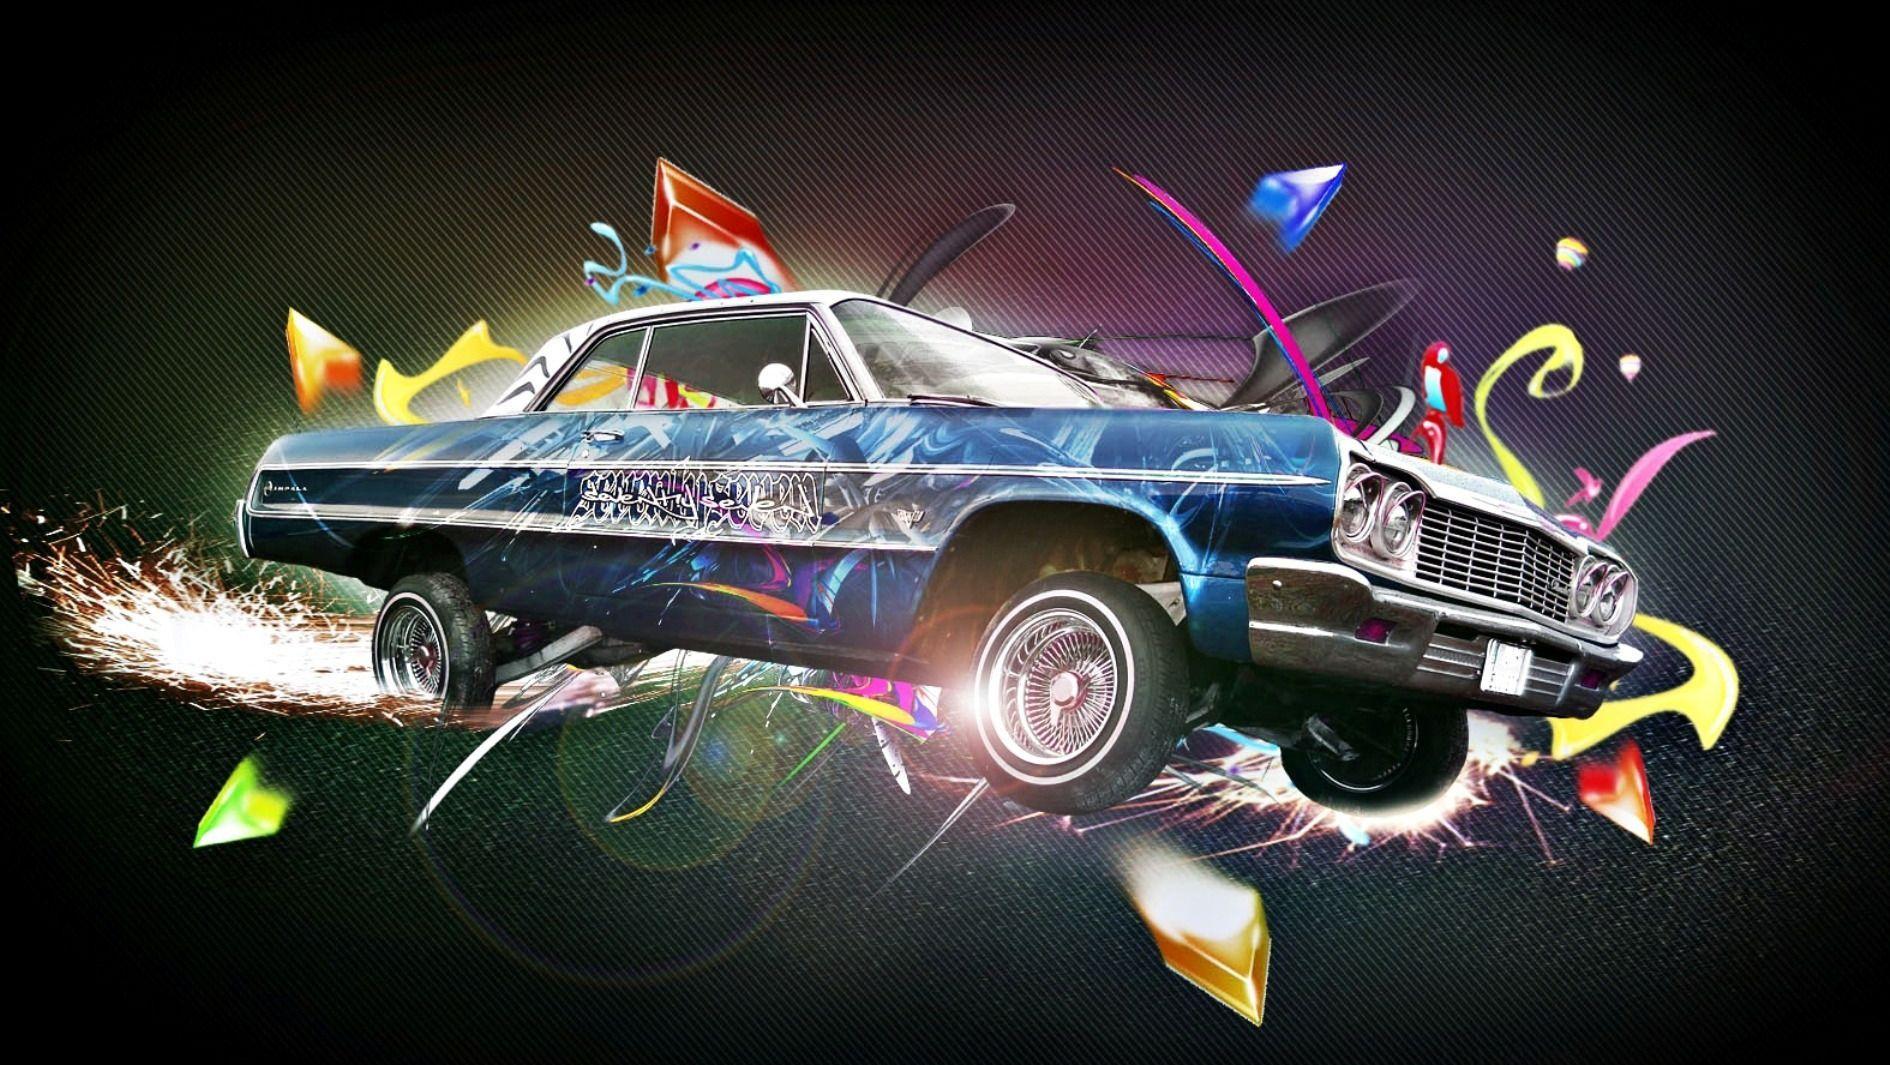 Blue 1964 Impala Lowrider And Graphics HD Wallpaper. Lowriders